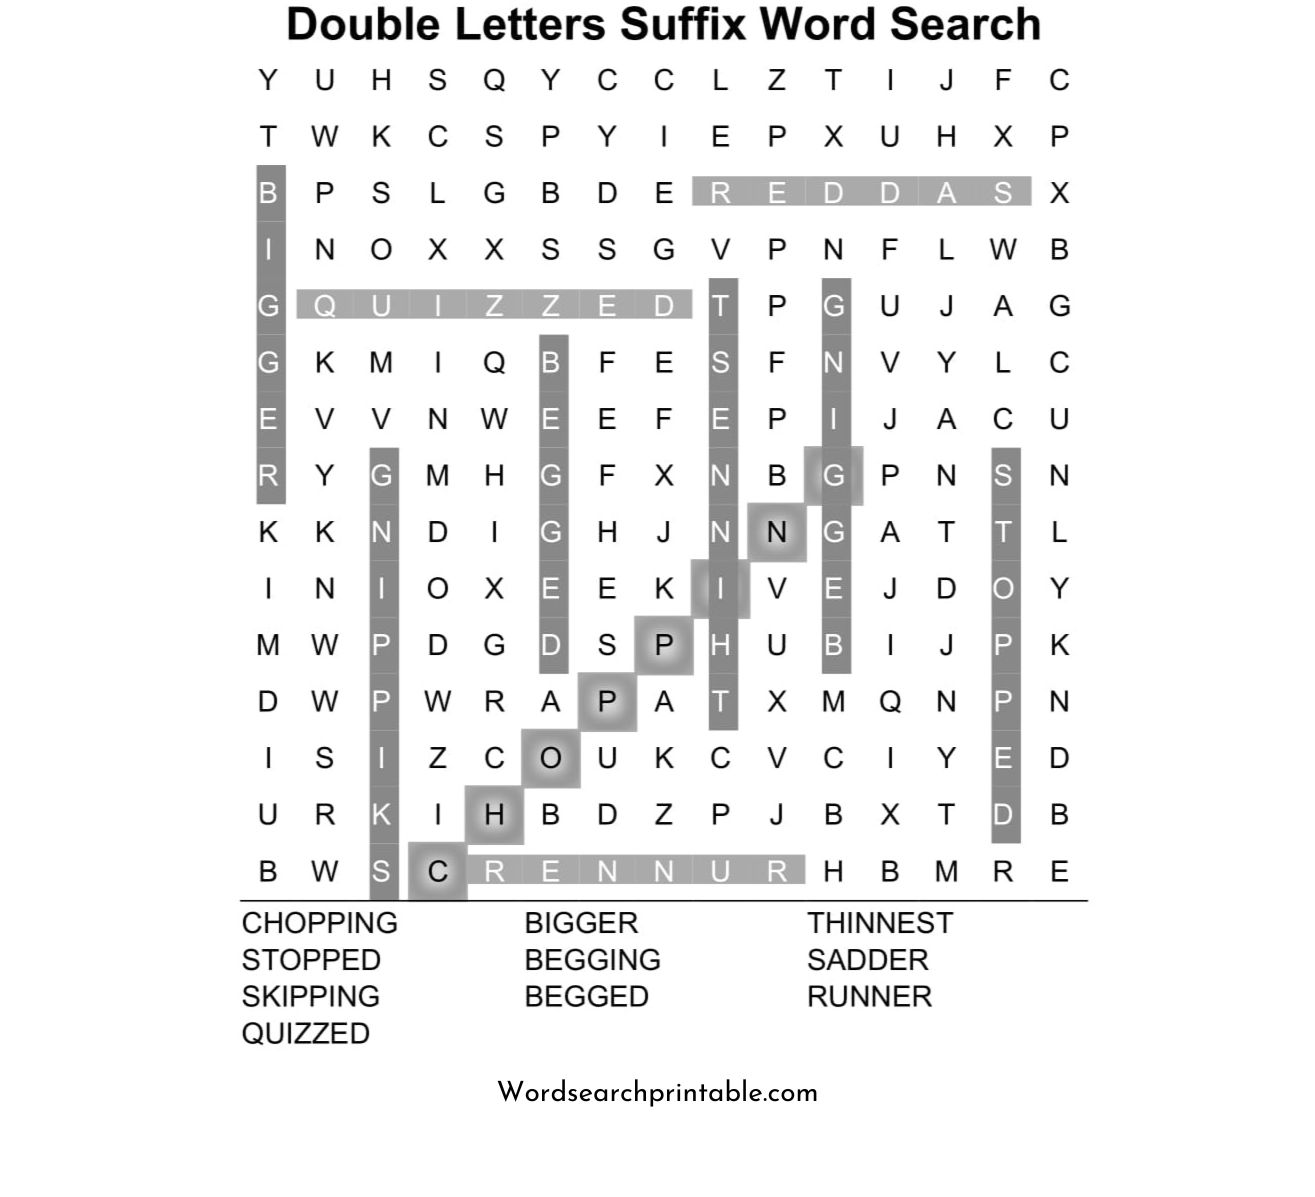 double letters suffix word search puzzle solution